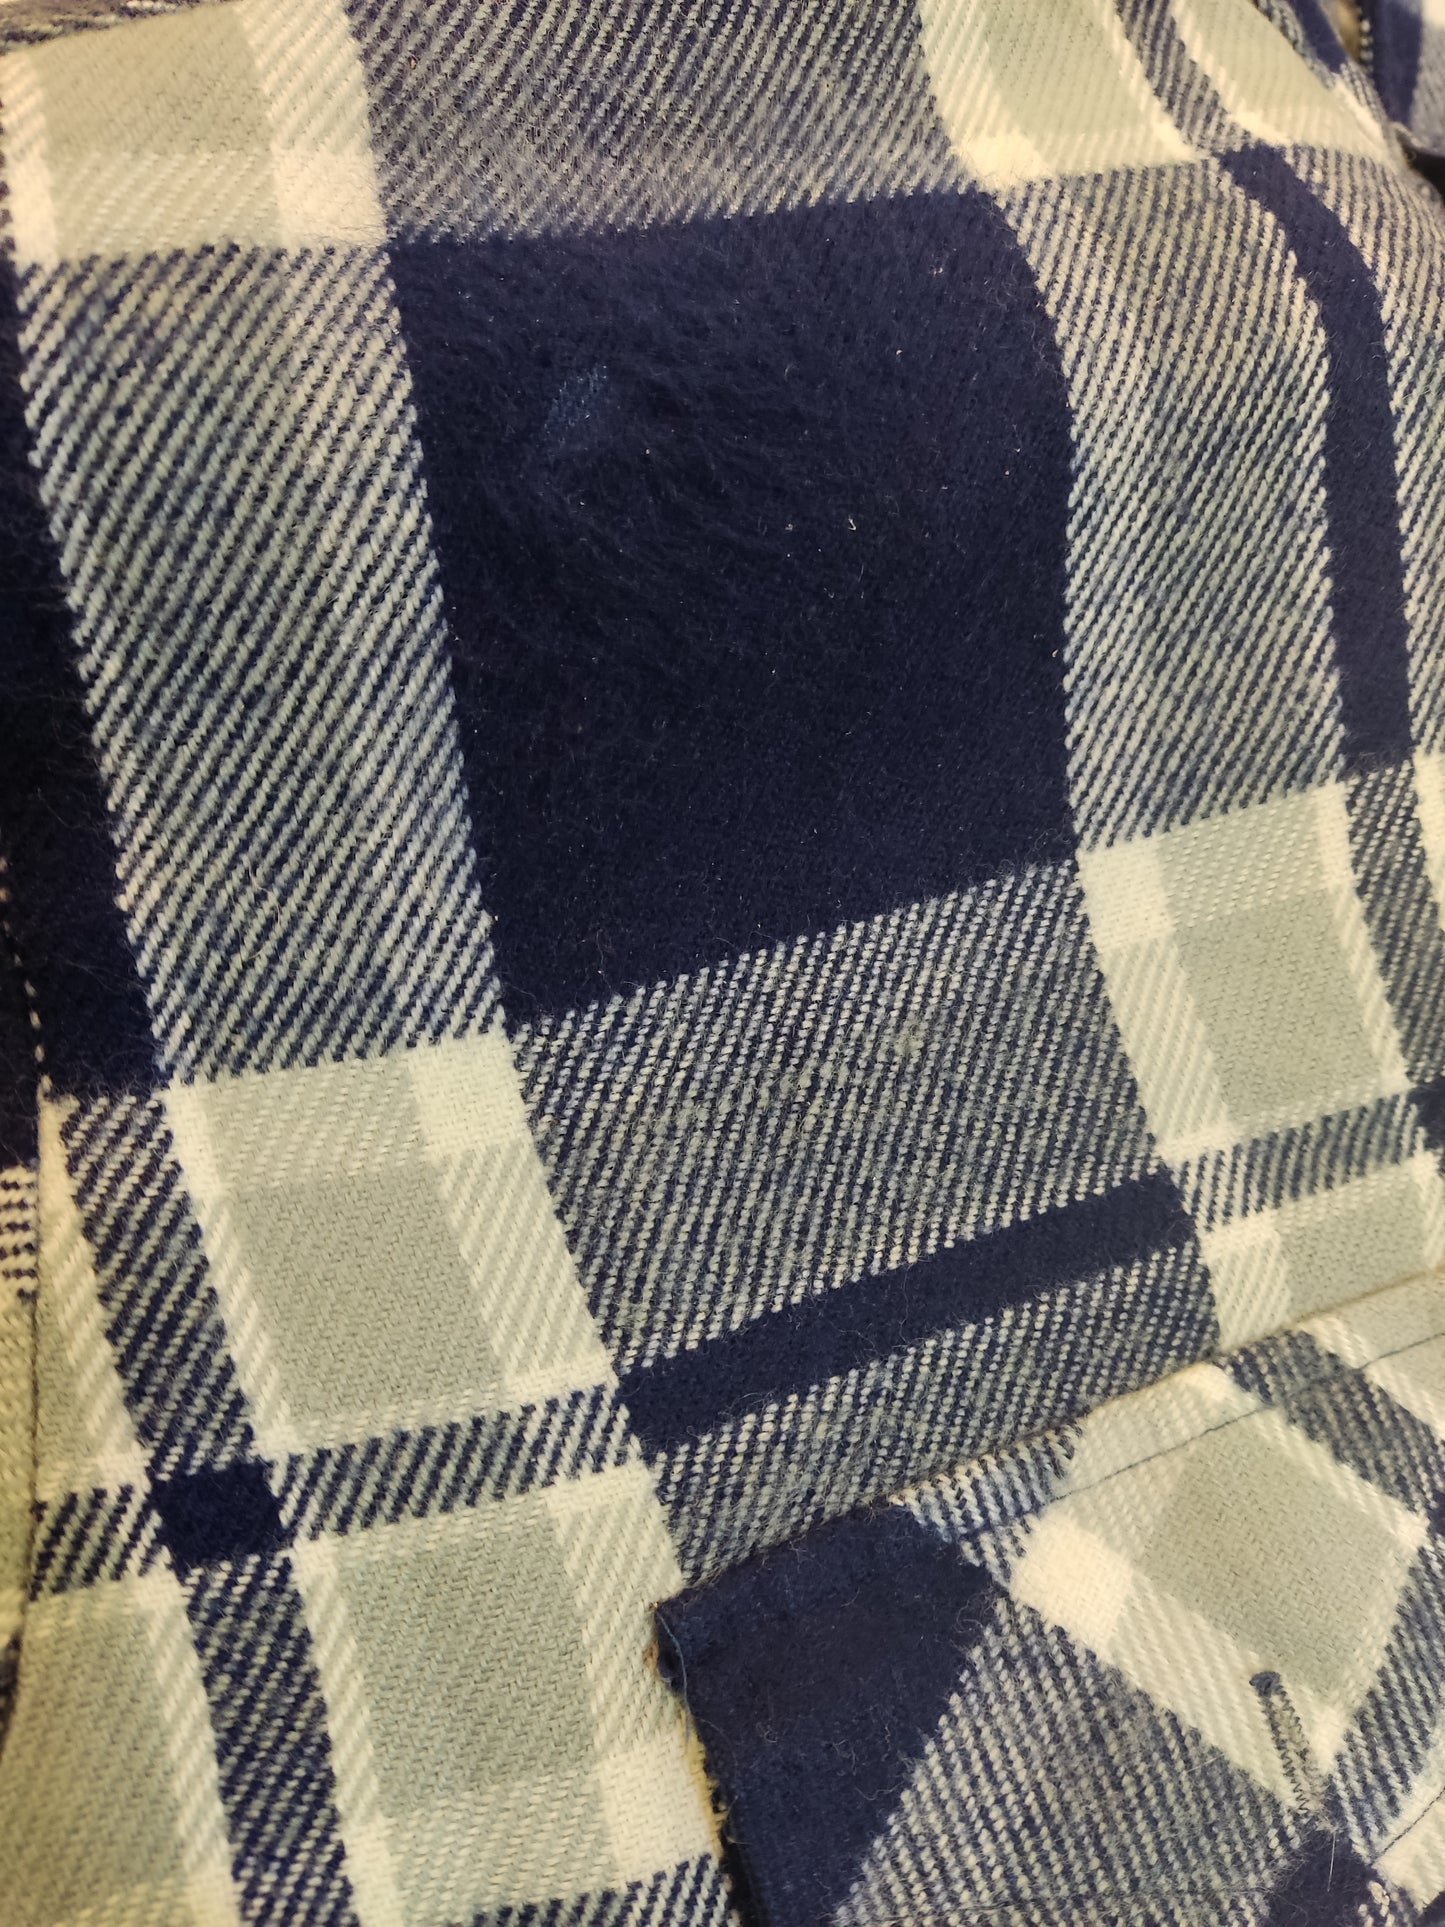 Navy Blue, White & Grey Check Super Soft Flannel Long Sleeved Shirt